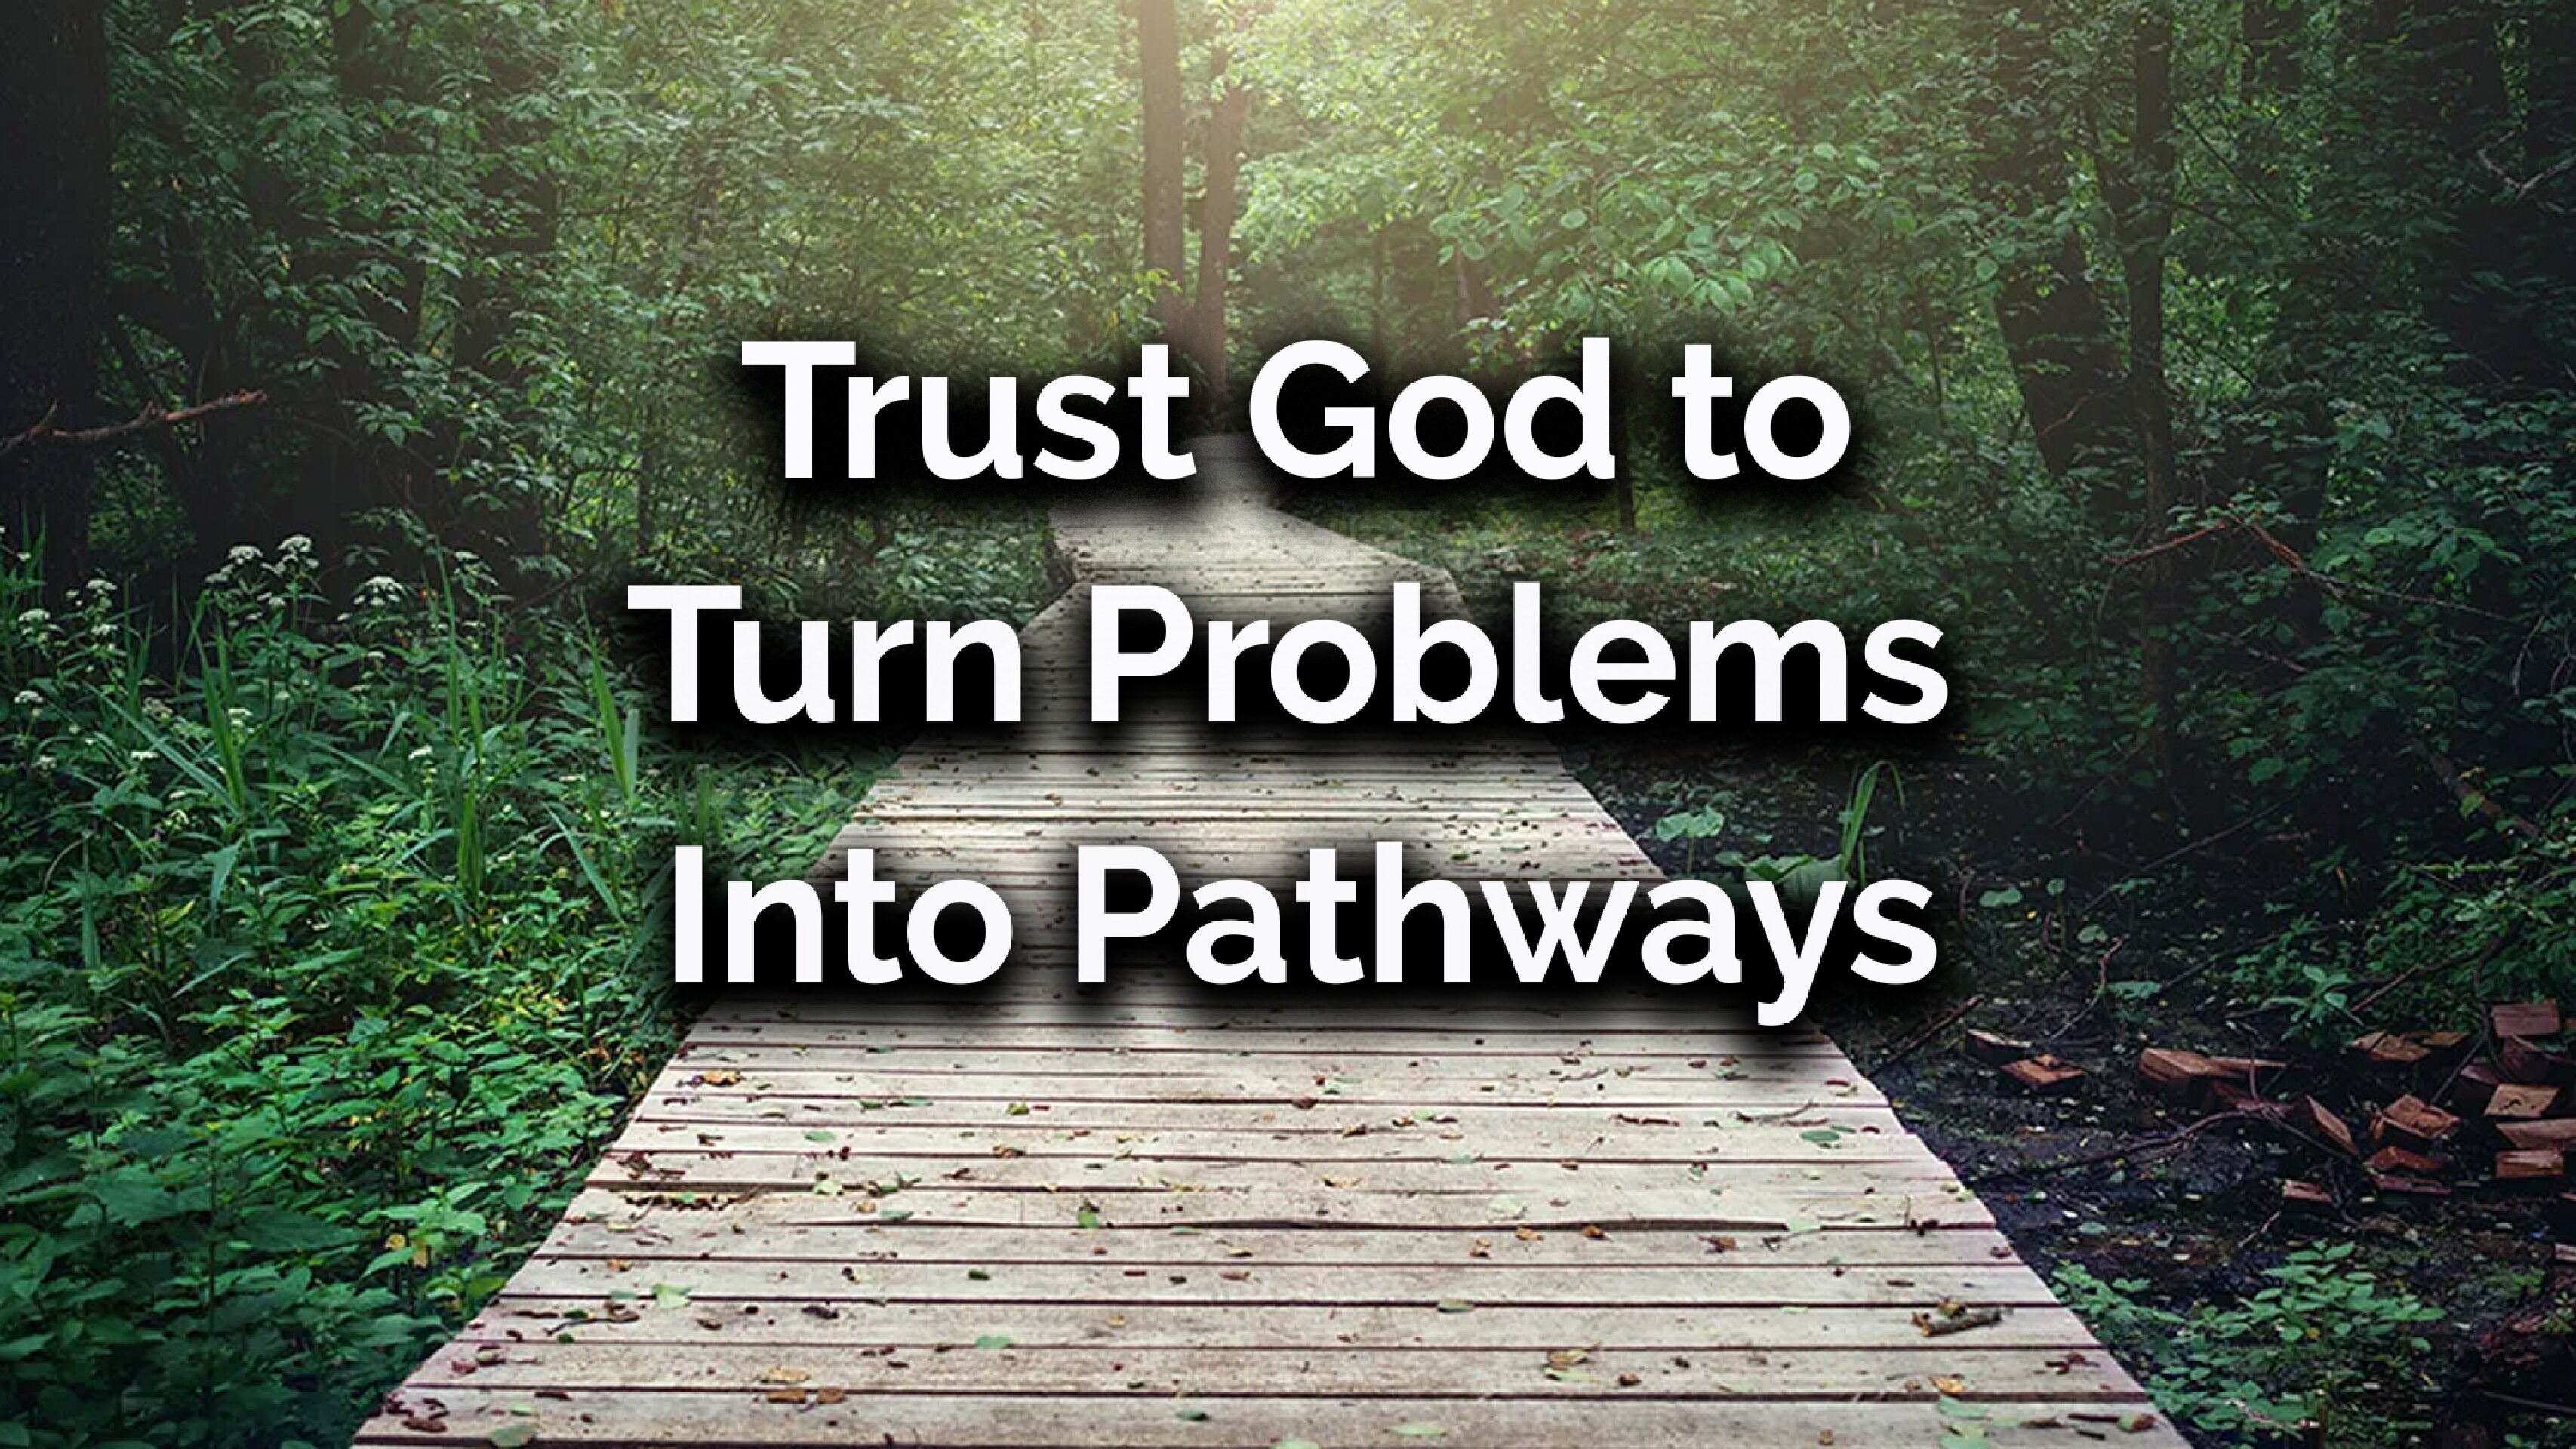 Trust God to Turn Problems into Pathways